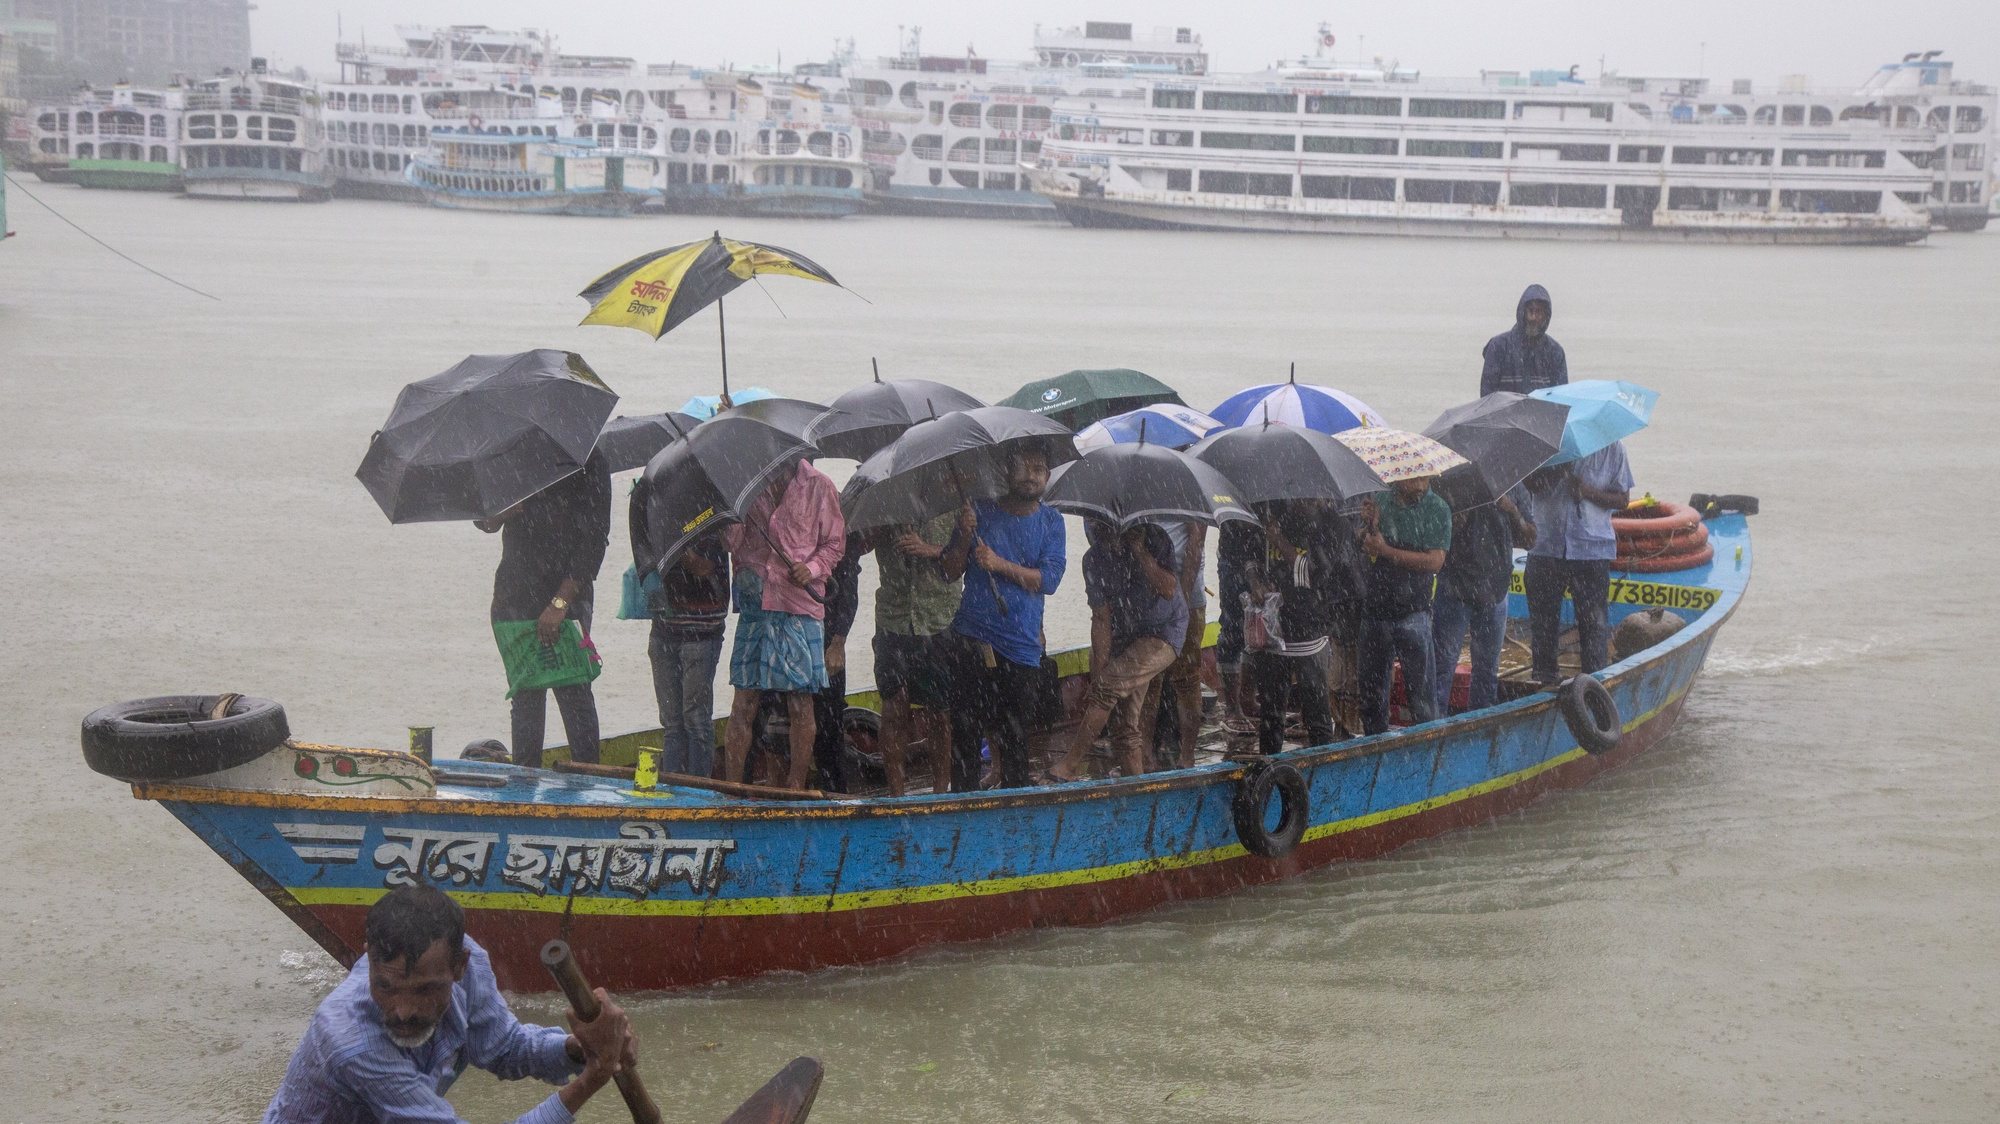 epa10262480 Bangladeshi passengers cross the Buriganga river as they hold umbrellas during a heavy rain and rough condition caused by cyclone Sitrang in Dhaka, Bangladesh, 24 October 2022. According to the Bangladesh Inland Water Transport Authority (BIWTA) and Bangladesh Meteorology Department, inland water transport has been suspended as the approaching cyclone Sitrang is expected to cross the South-Southwest part of Barishal and Chattogram district by 25 October. Bangladesh met office warned that the cyclonic storm may intensify further and turn into a severe cyclone.  EPA/MONIRUL ALAM